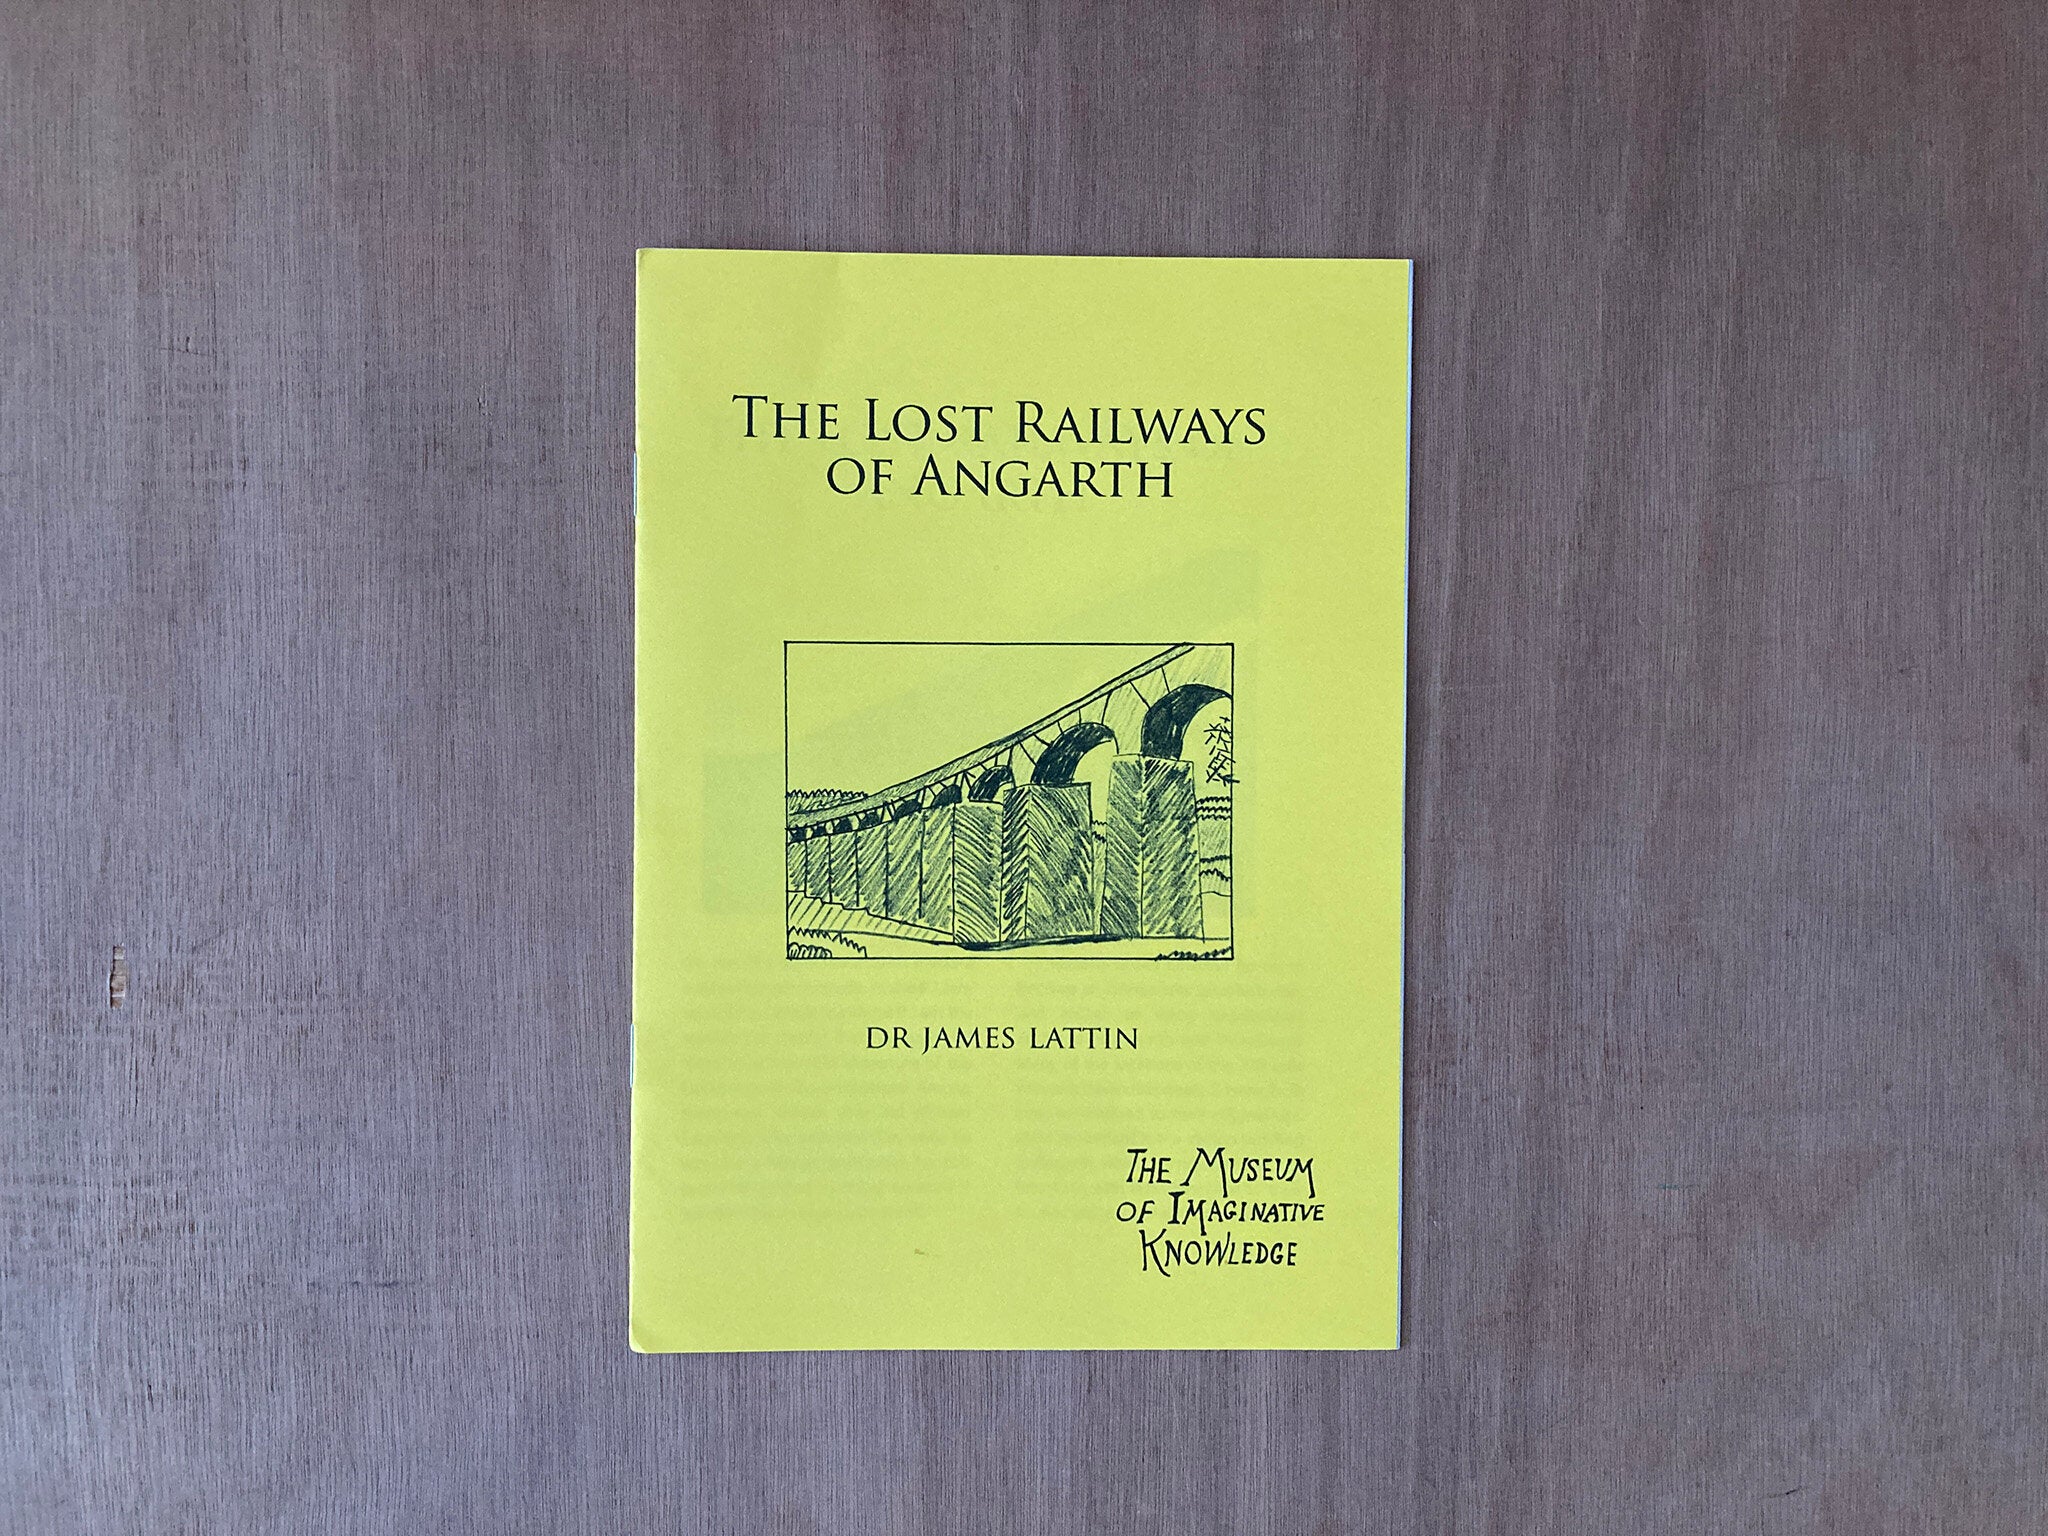 THE LOST RAILWAYS OF ANGARTH by Dr James Lattin